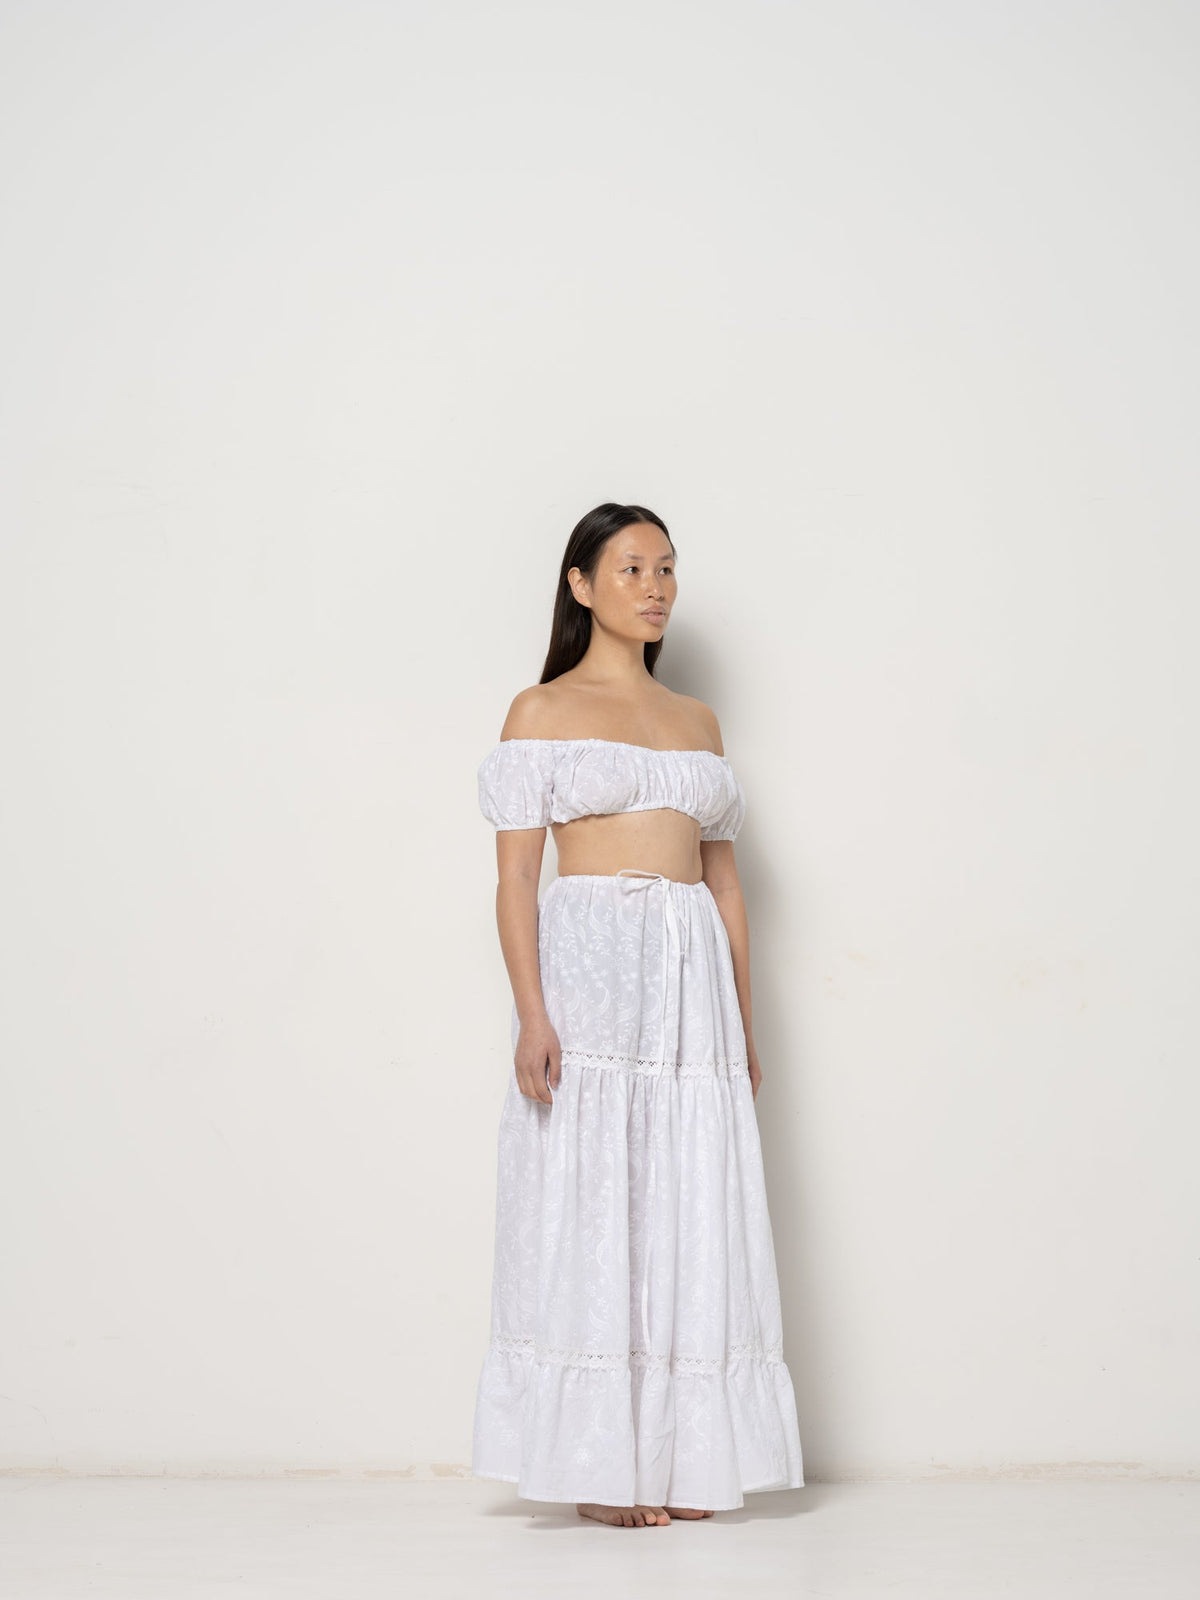 Rose Skirt - White Flowers Embroidery Cotton